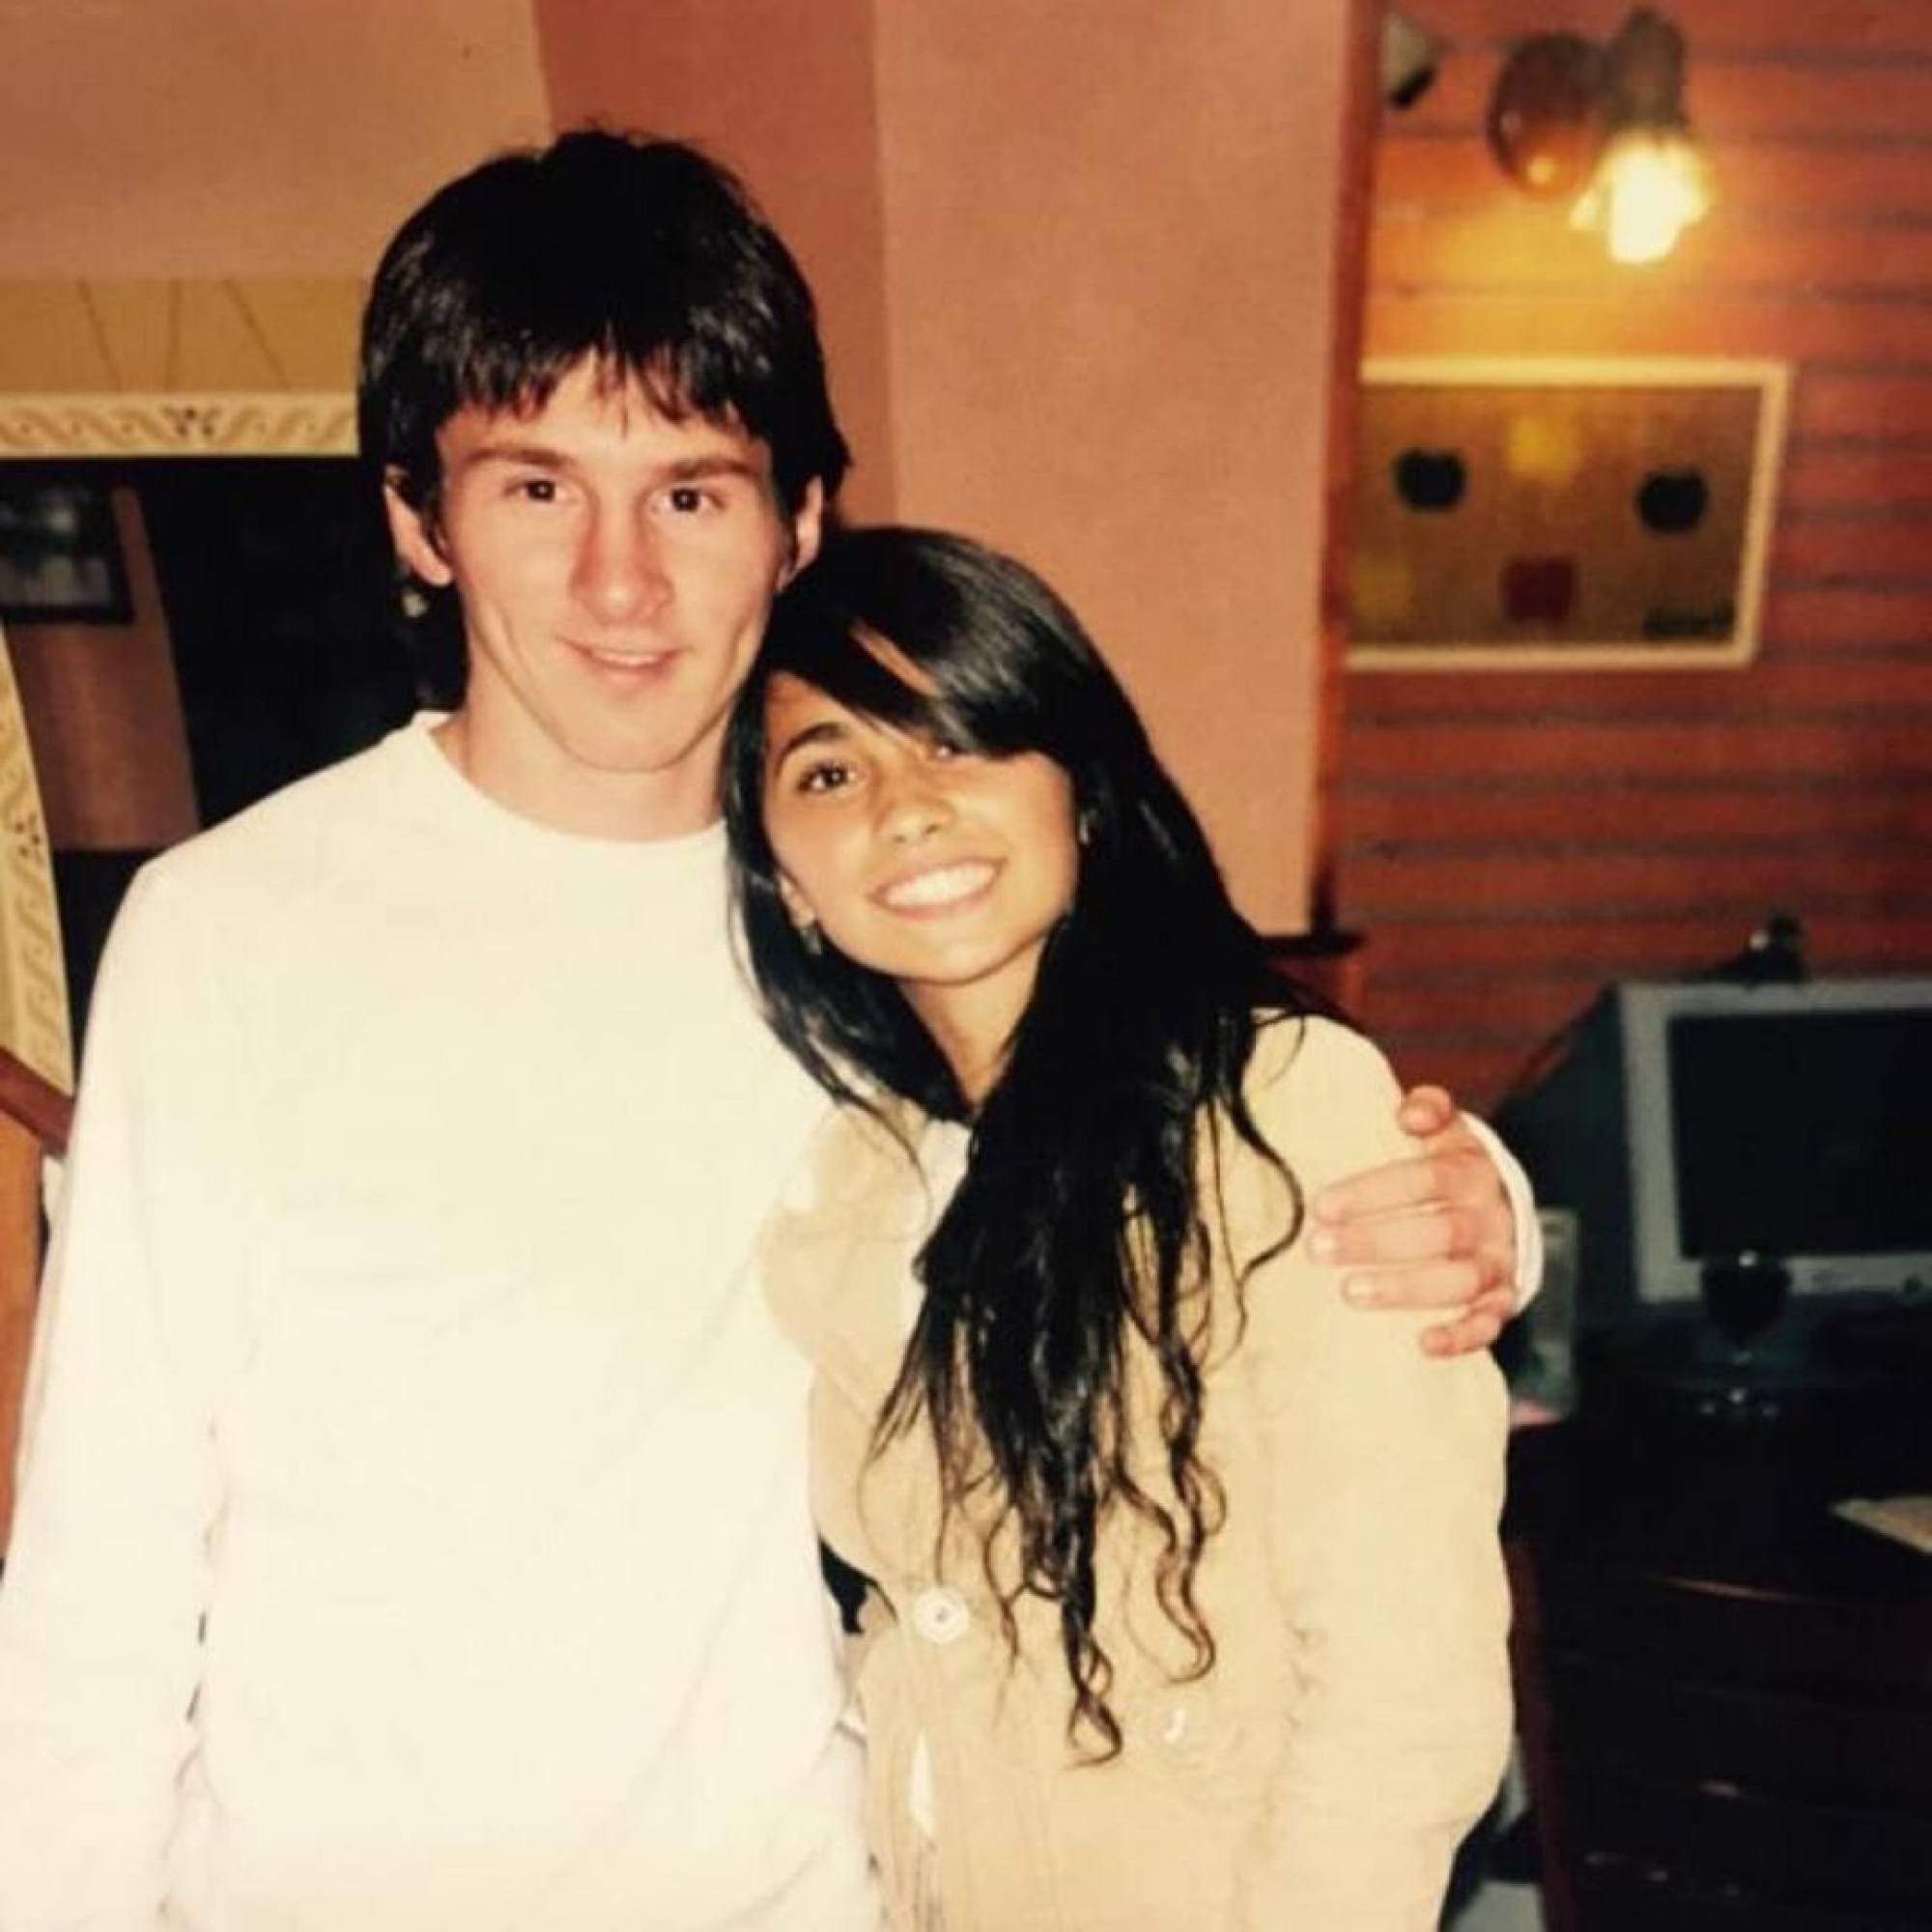 Lionel Messi and Antonela Roccuzzo in their youth. Photo: @Roccuzzo/Instagram